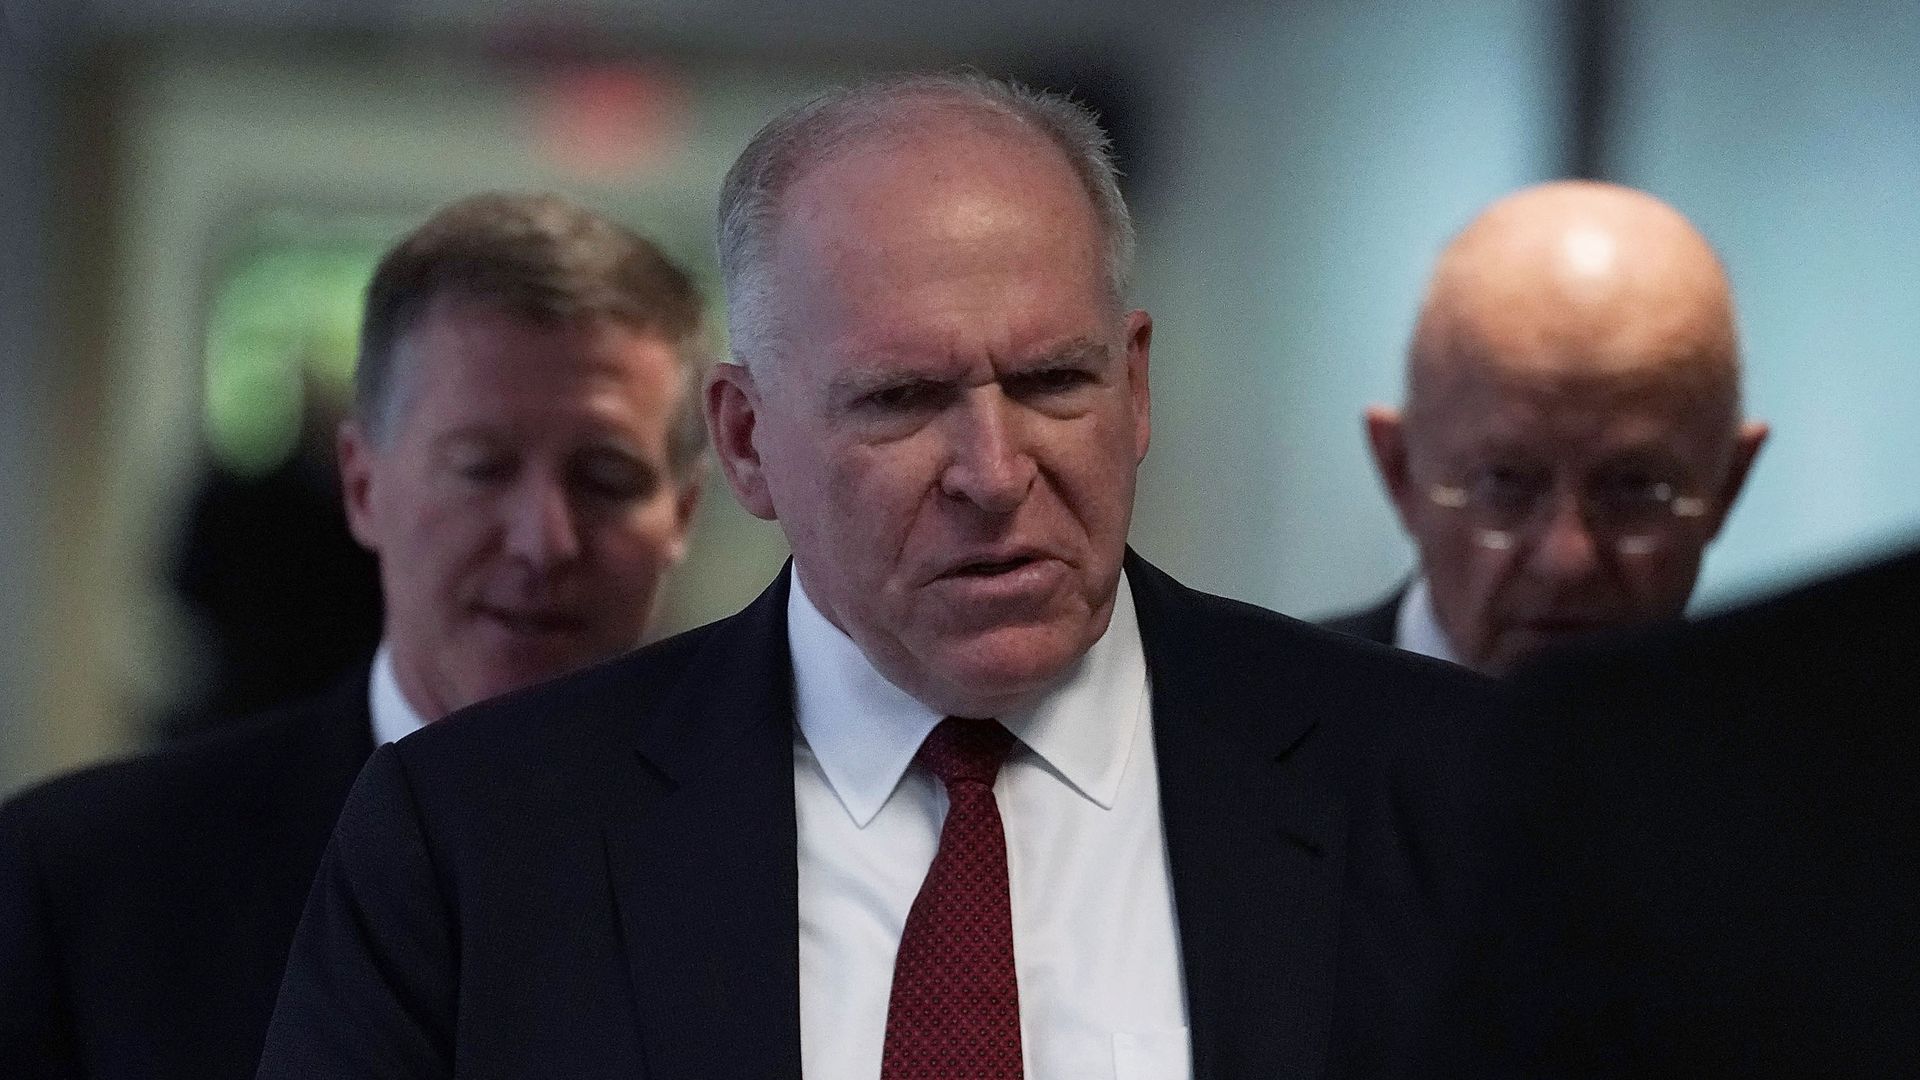 John Brennan walks with James Clapper at a hearing before the Senate Intelligence Committee.